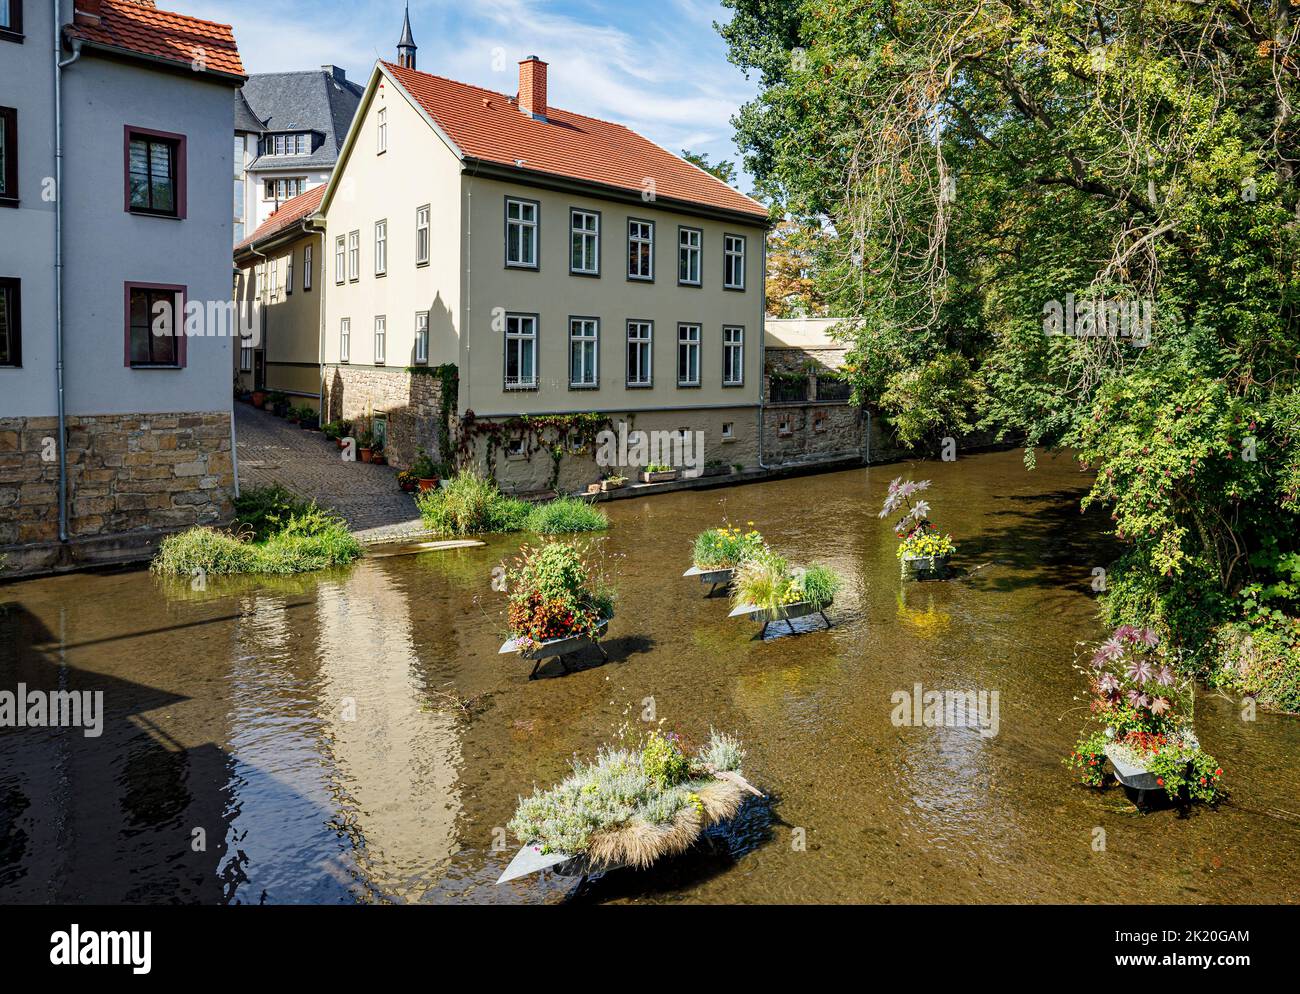 Tree Boxes In The Course Of The River Gera In The Old Town Of Erfurt, Thuringia, Germany, Europe Stock Photo